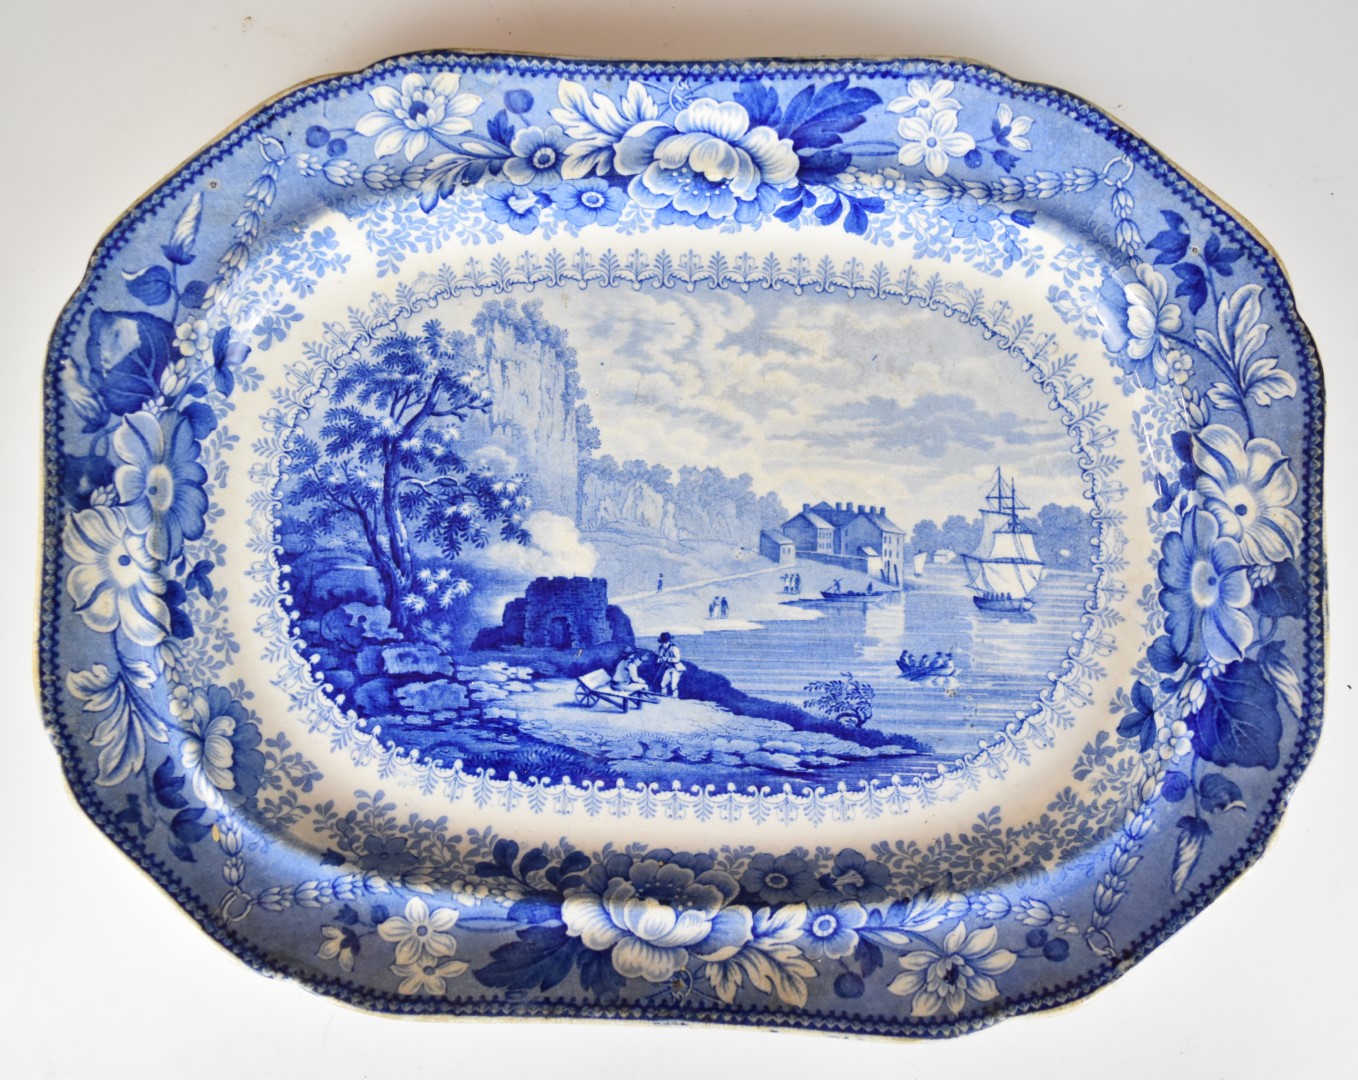 19thC blue and white transfer printed ware with named scenes of Bristol, Clifton and River Avon, - Image 5 of 10